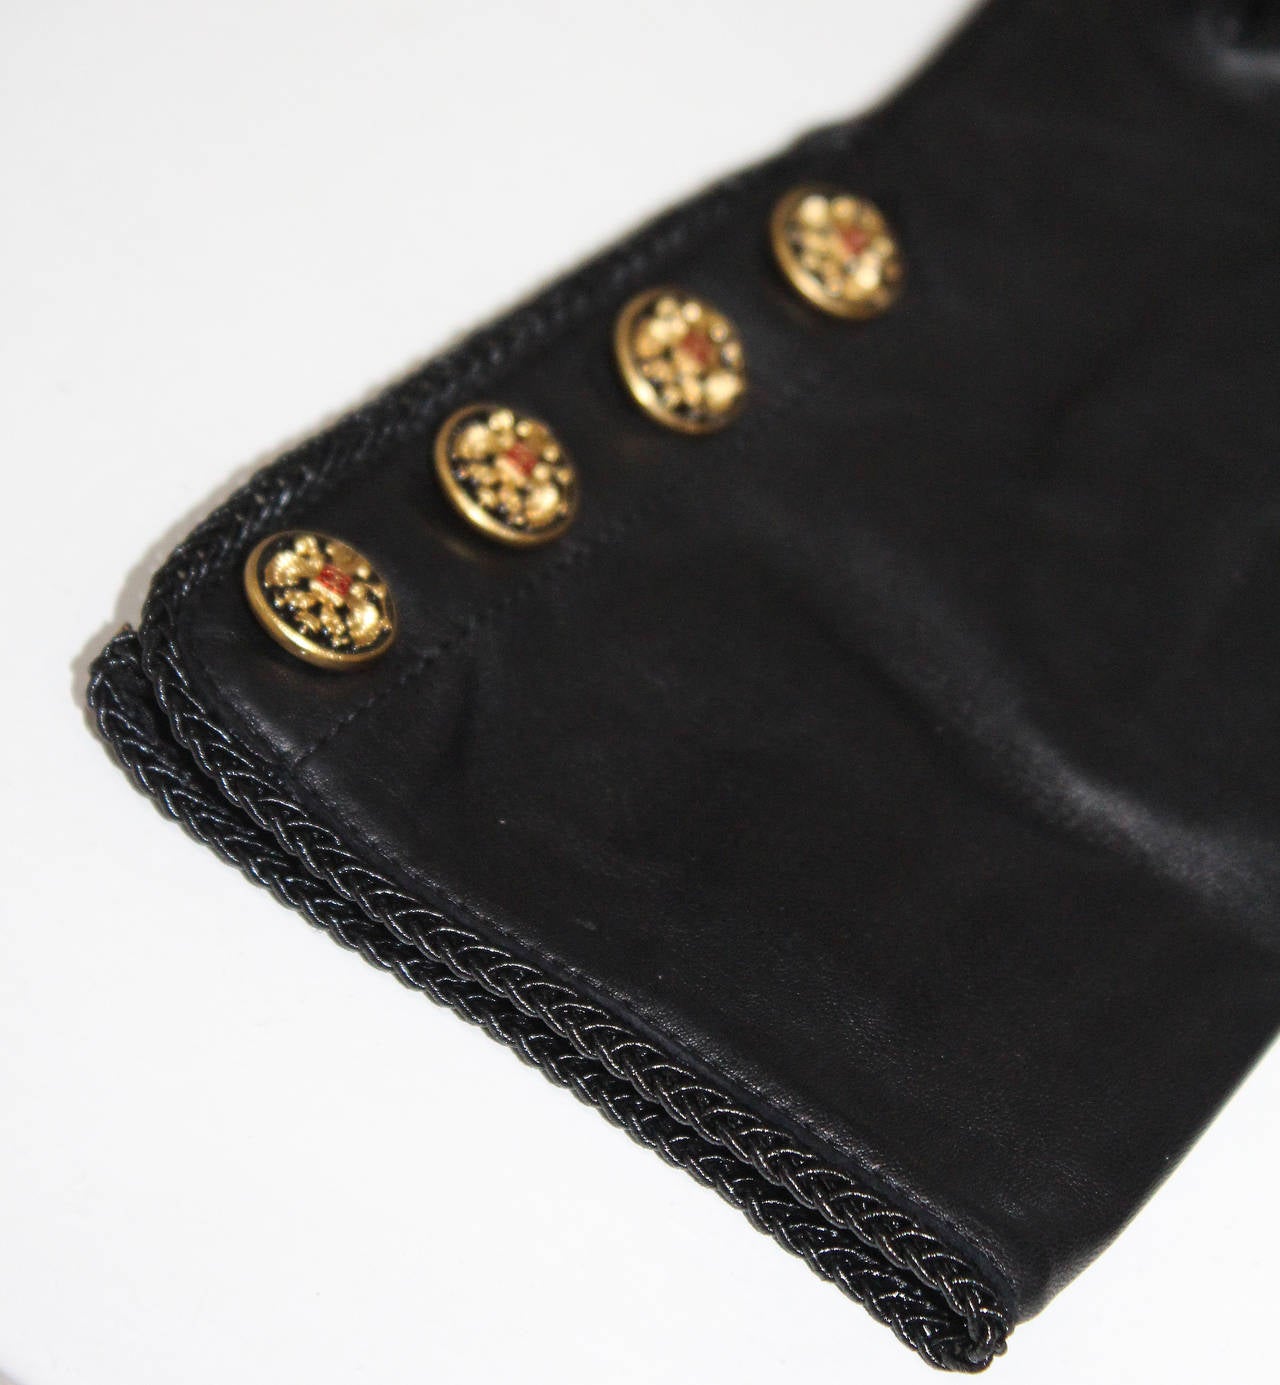 A pair of black lambskin leather Chanel gloves with braided trim and four gold 'cc' buttons. 

Size: 7.5